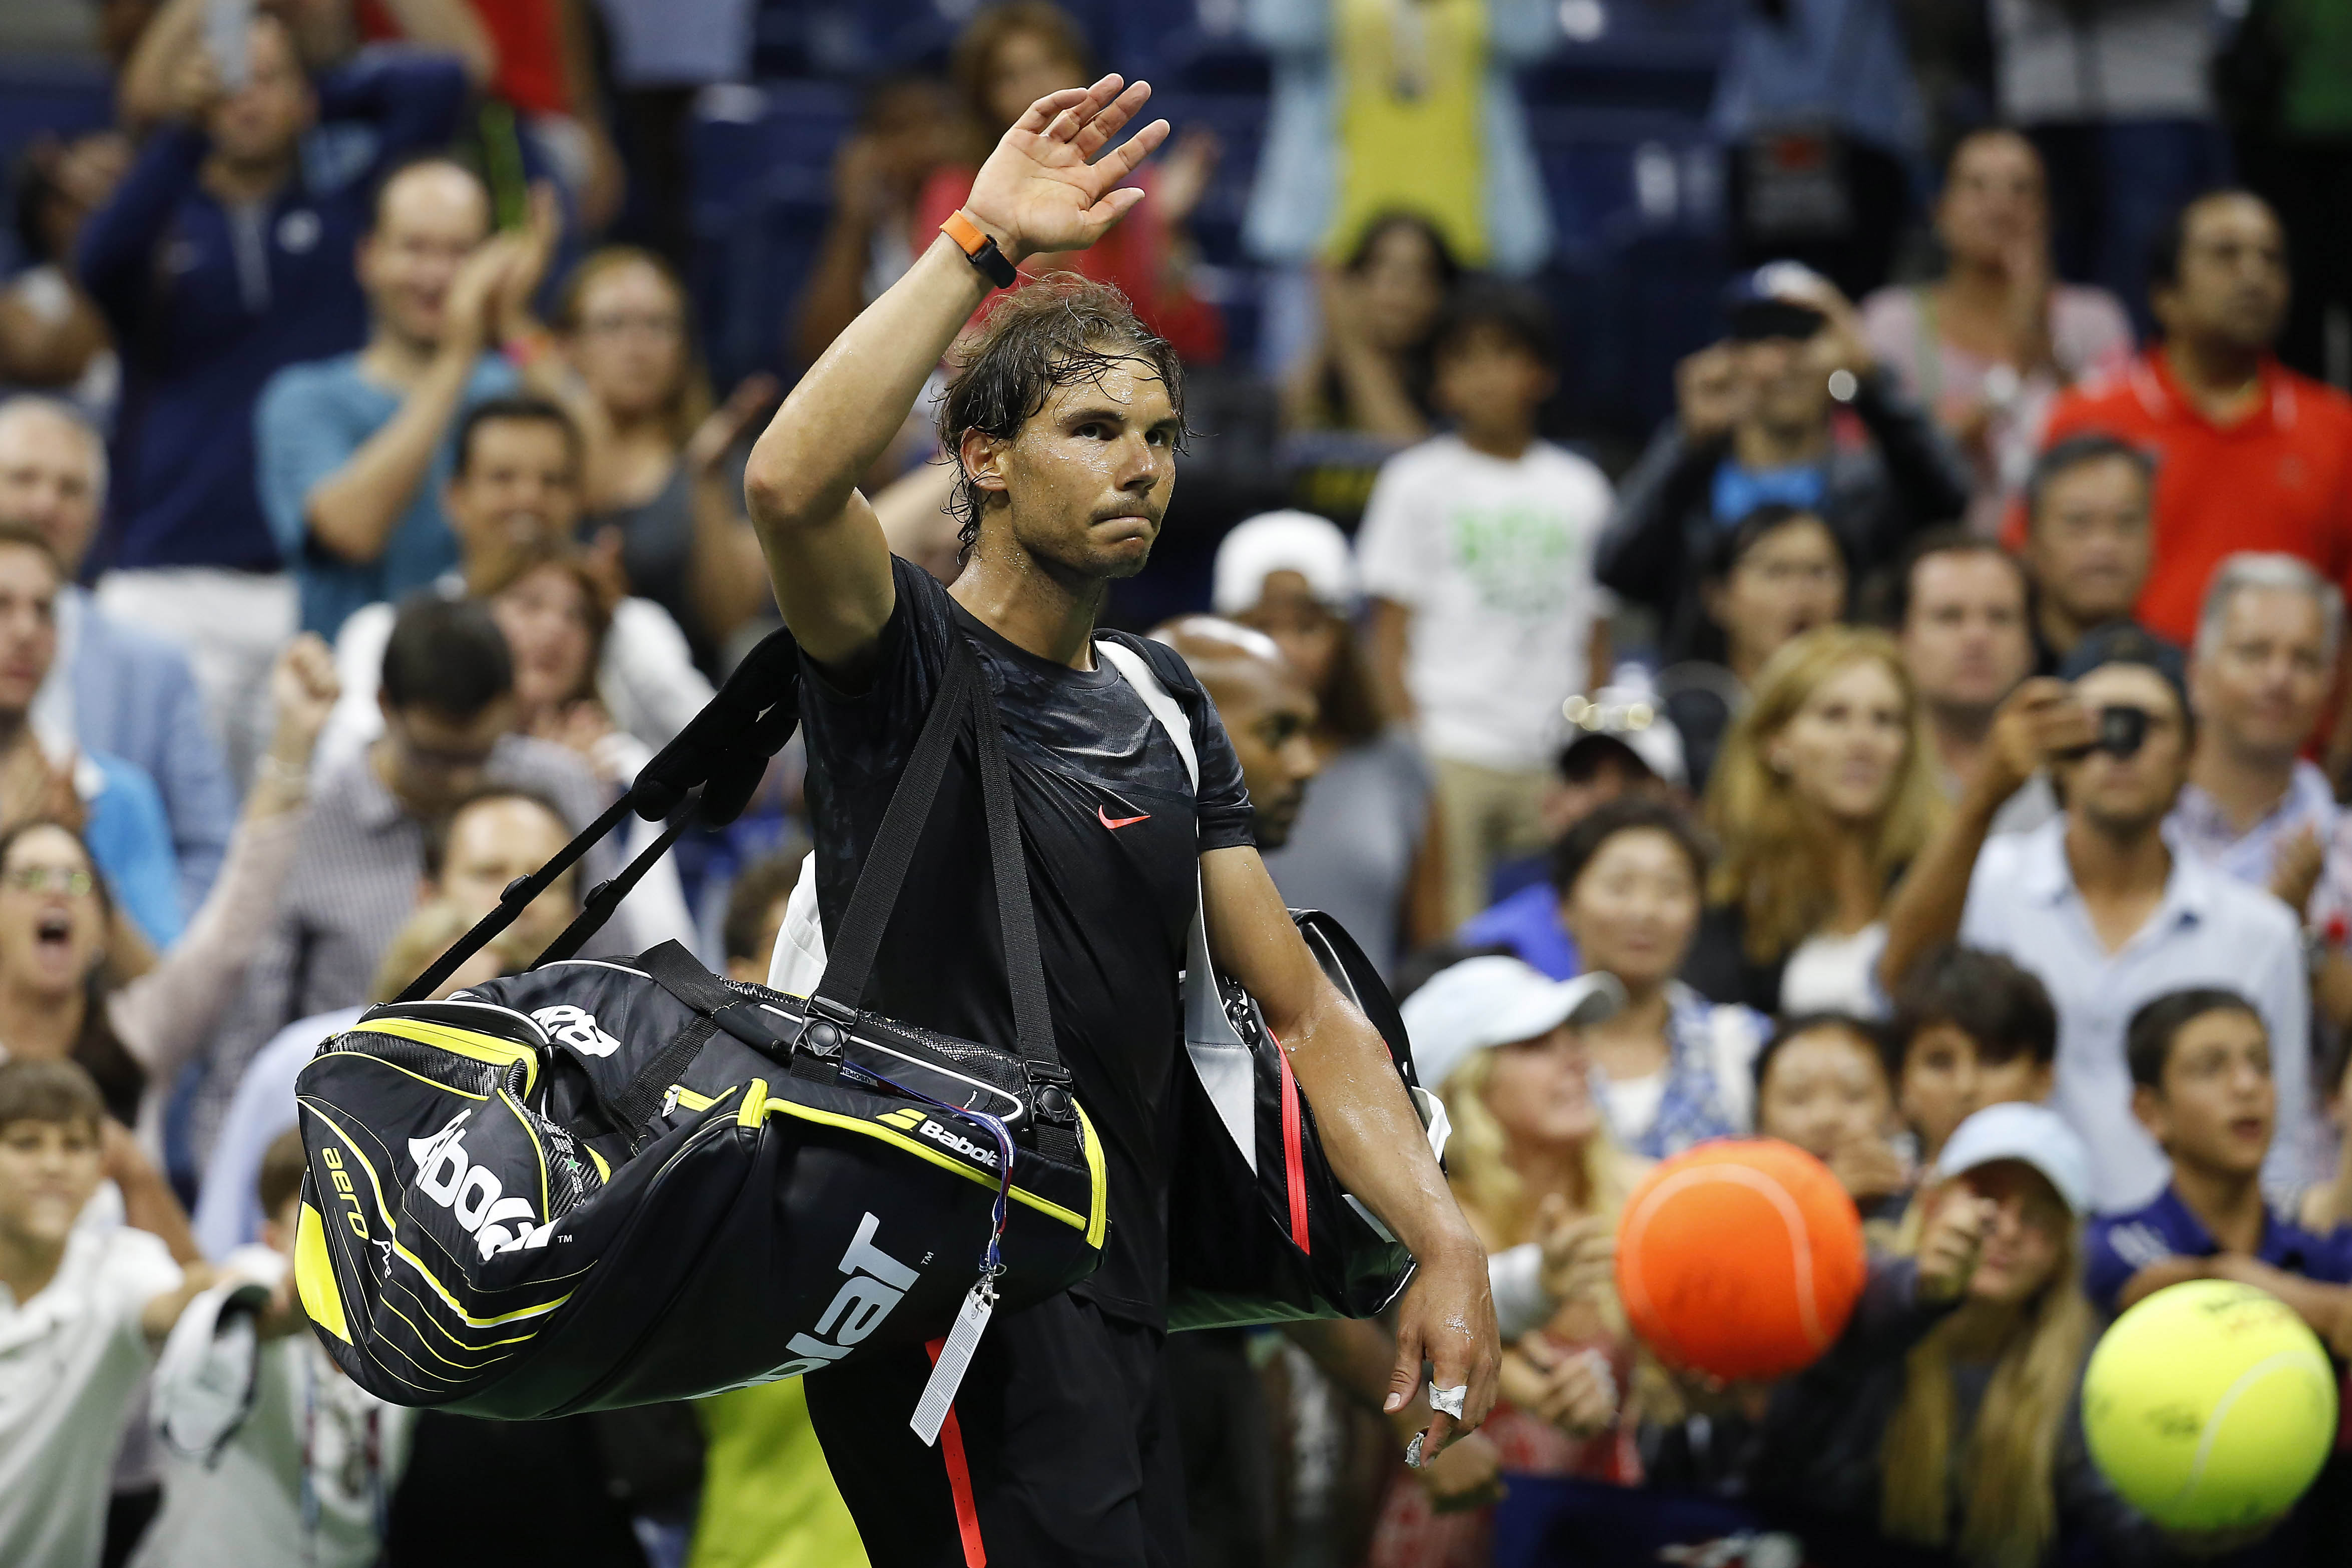 Sep 4, 2015; New York, NY, USA; Rafael Nadal of Spain waves to the crowd as he leaves the court after his match against Fabio Fognini of Italy (not pictured) on day five of the 2015 U.S. Open tennis tournament at USTA Billie Jean King National Tennis Center. Fognini won 3-6, 4-6, 6-4, 6-3, 6-4. Mandatory Credit: Geoff Burke-USA TODAY Sports